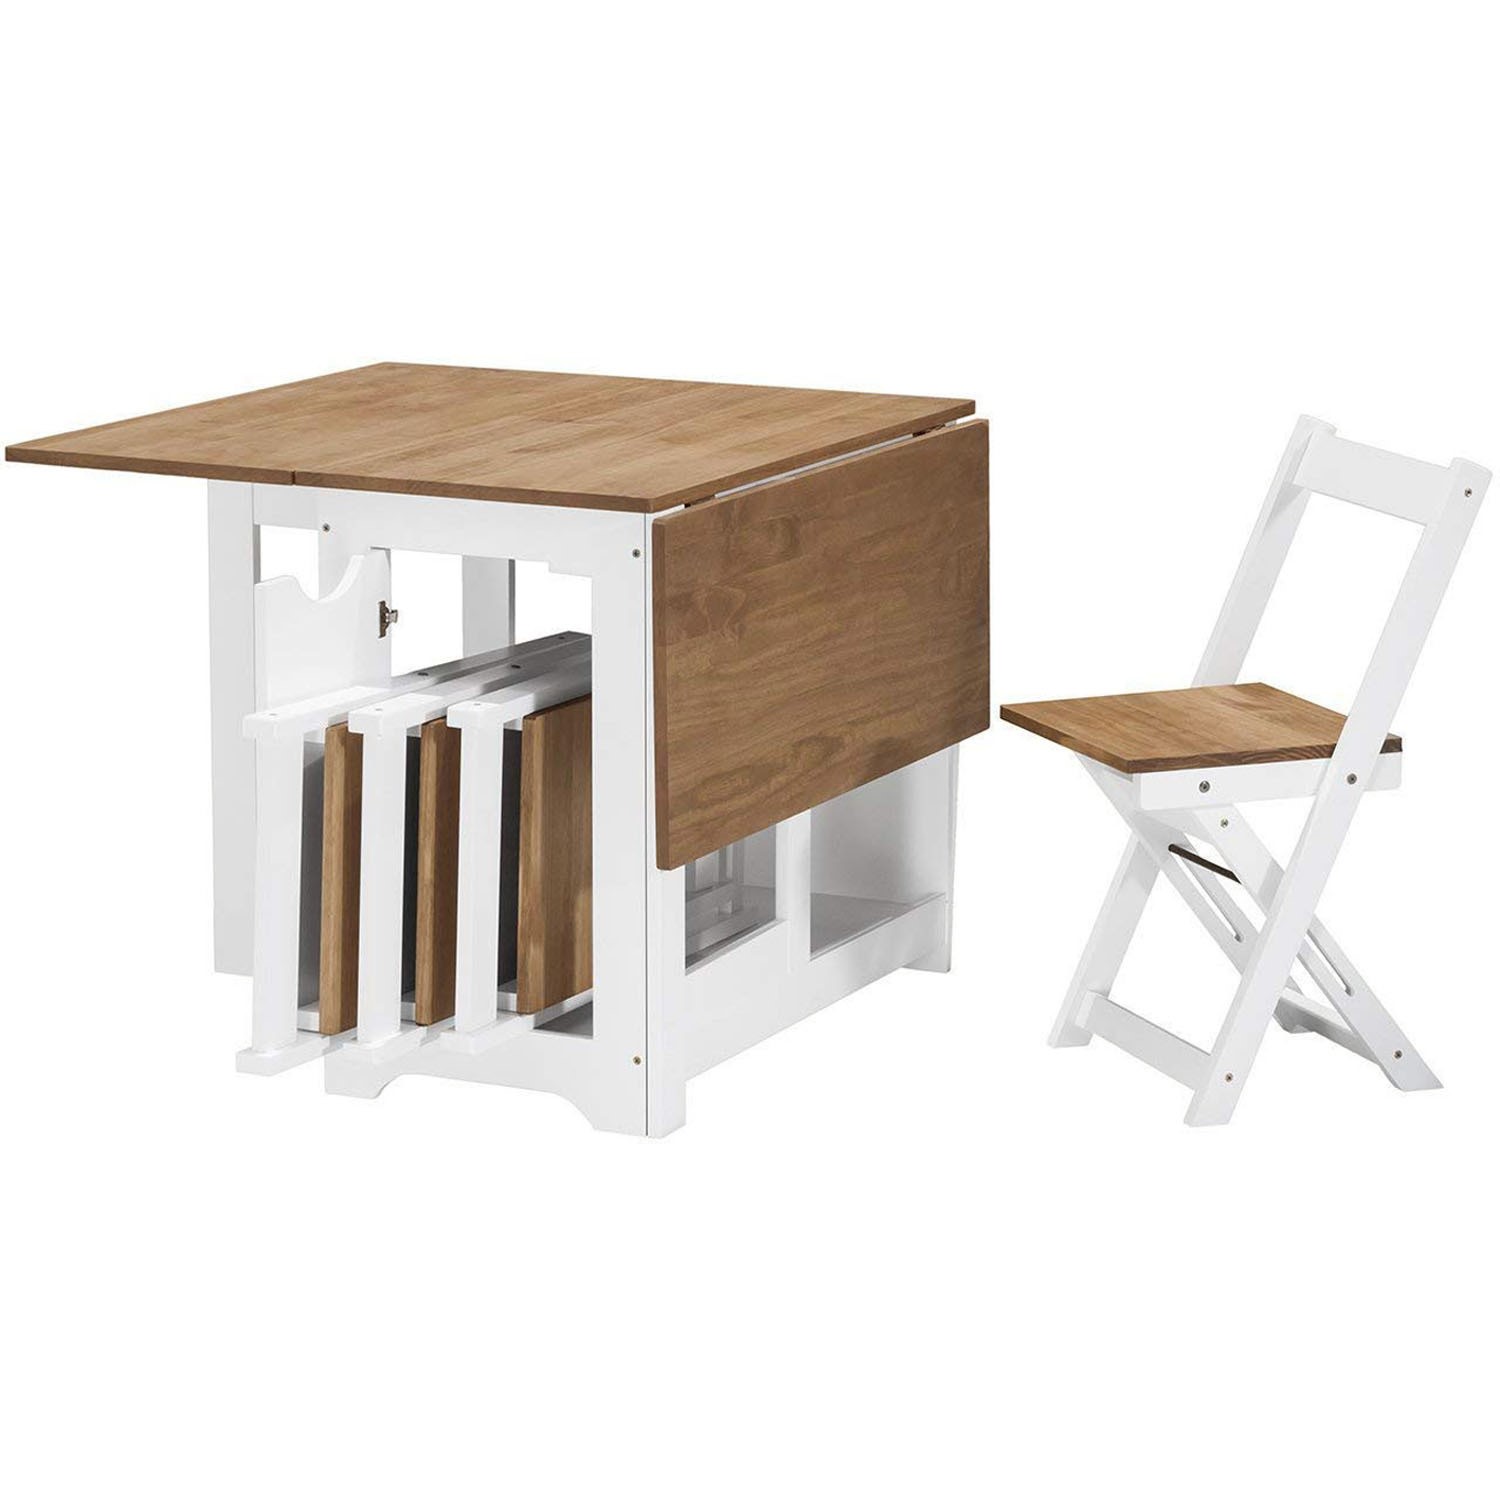 seconique santos butterfly folding dining set with 4 dining chairs in white   pine